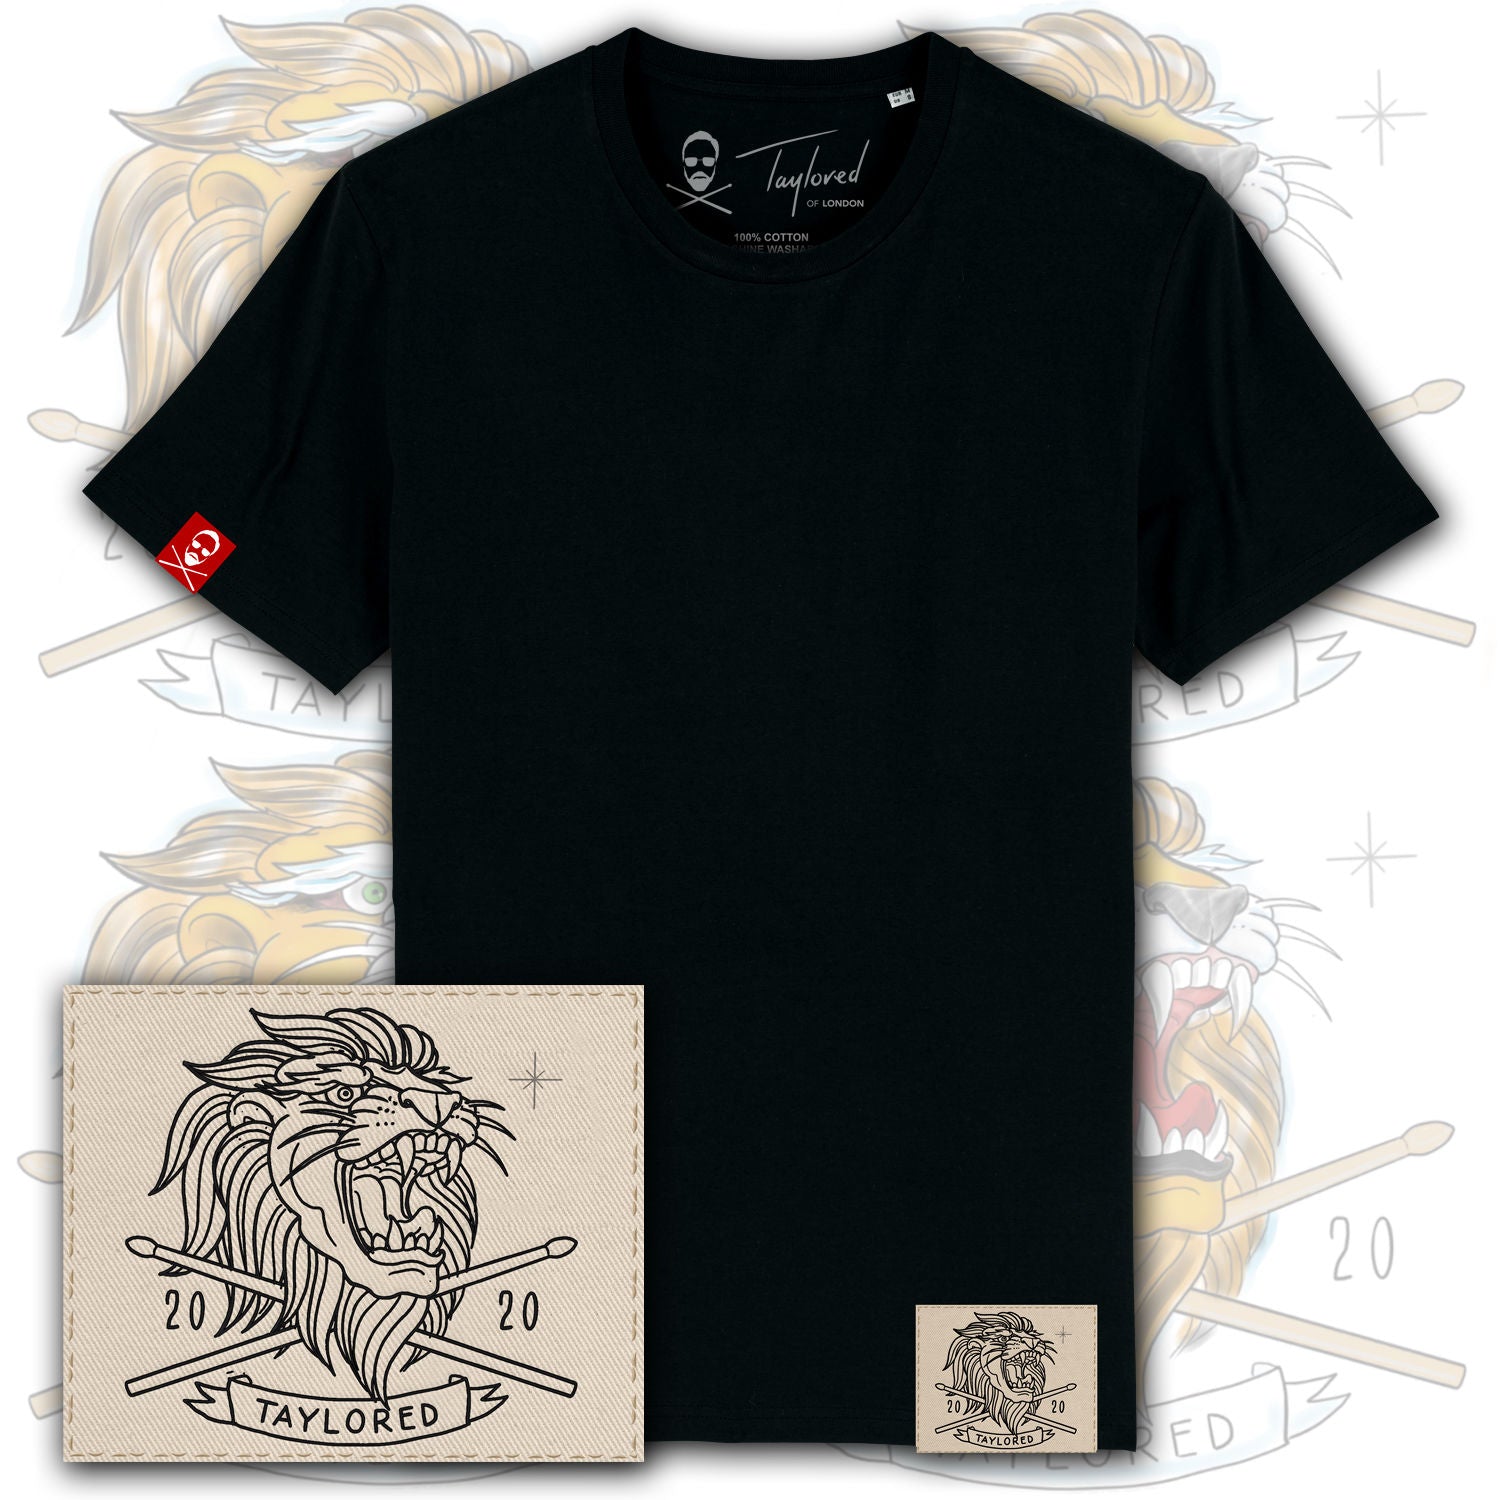 Roger Taylor - 'Taylored' 2020 Embroidered Lion Patch T-Shirt